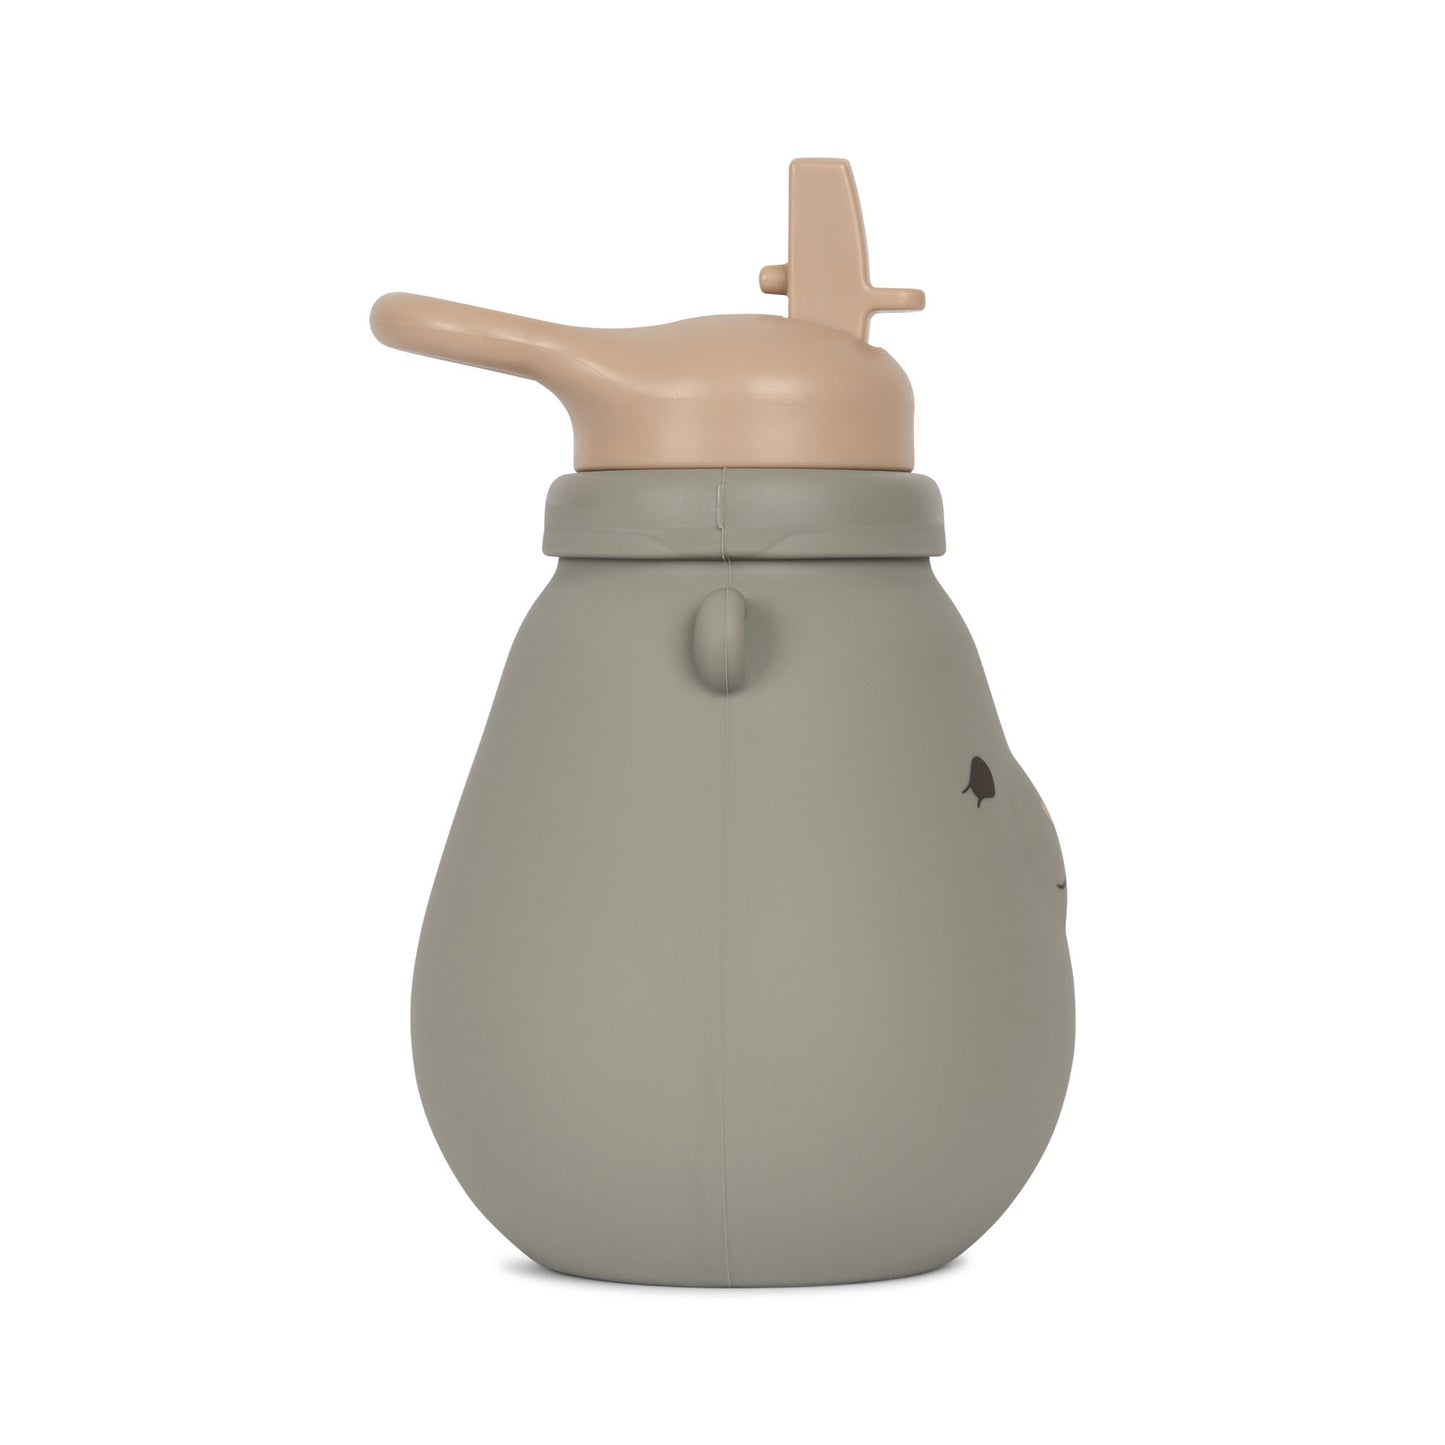 Silikonflasche Teddy 'Whale' - The Little One • Family.Concept.Store. 